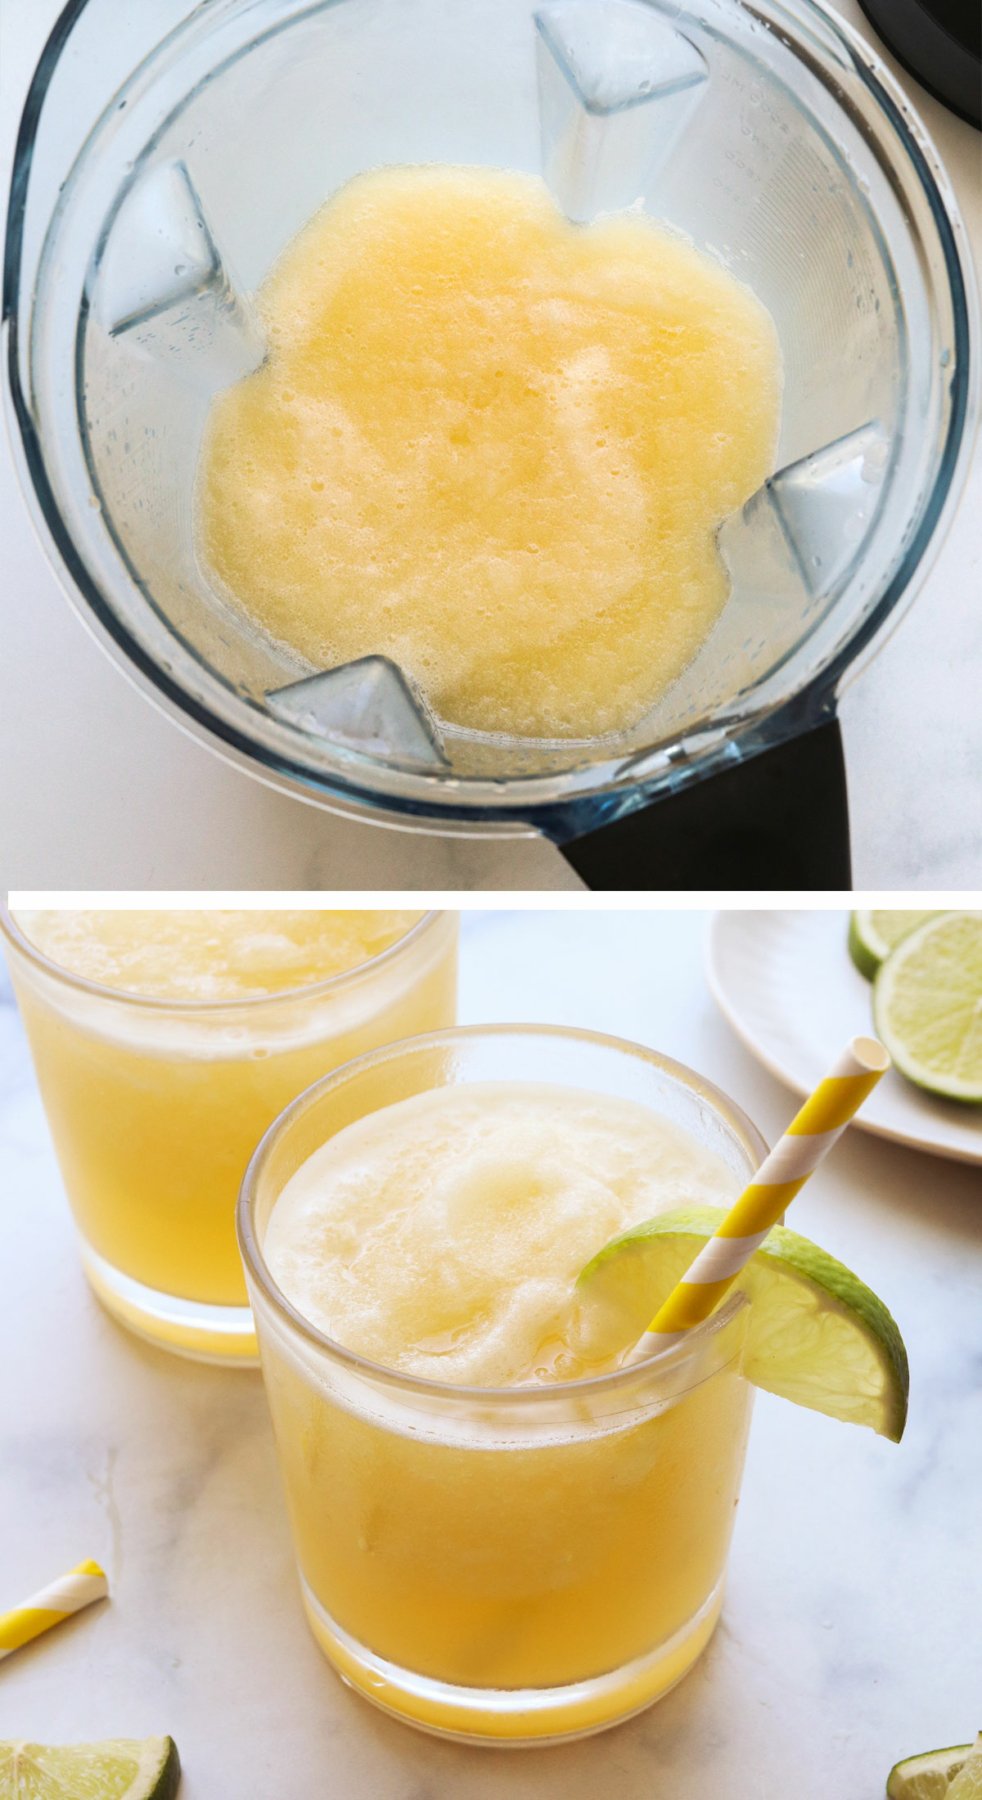 margarita blended in a pitcher and poured into two glasses for serving.